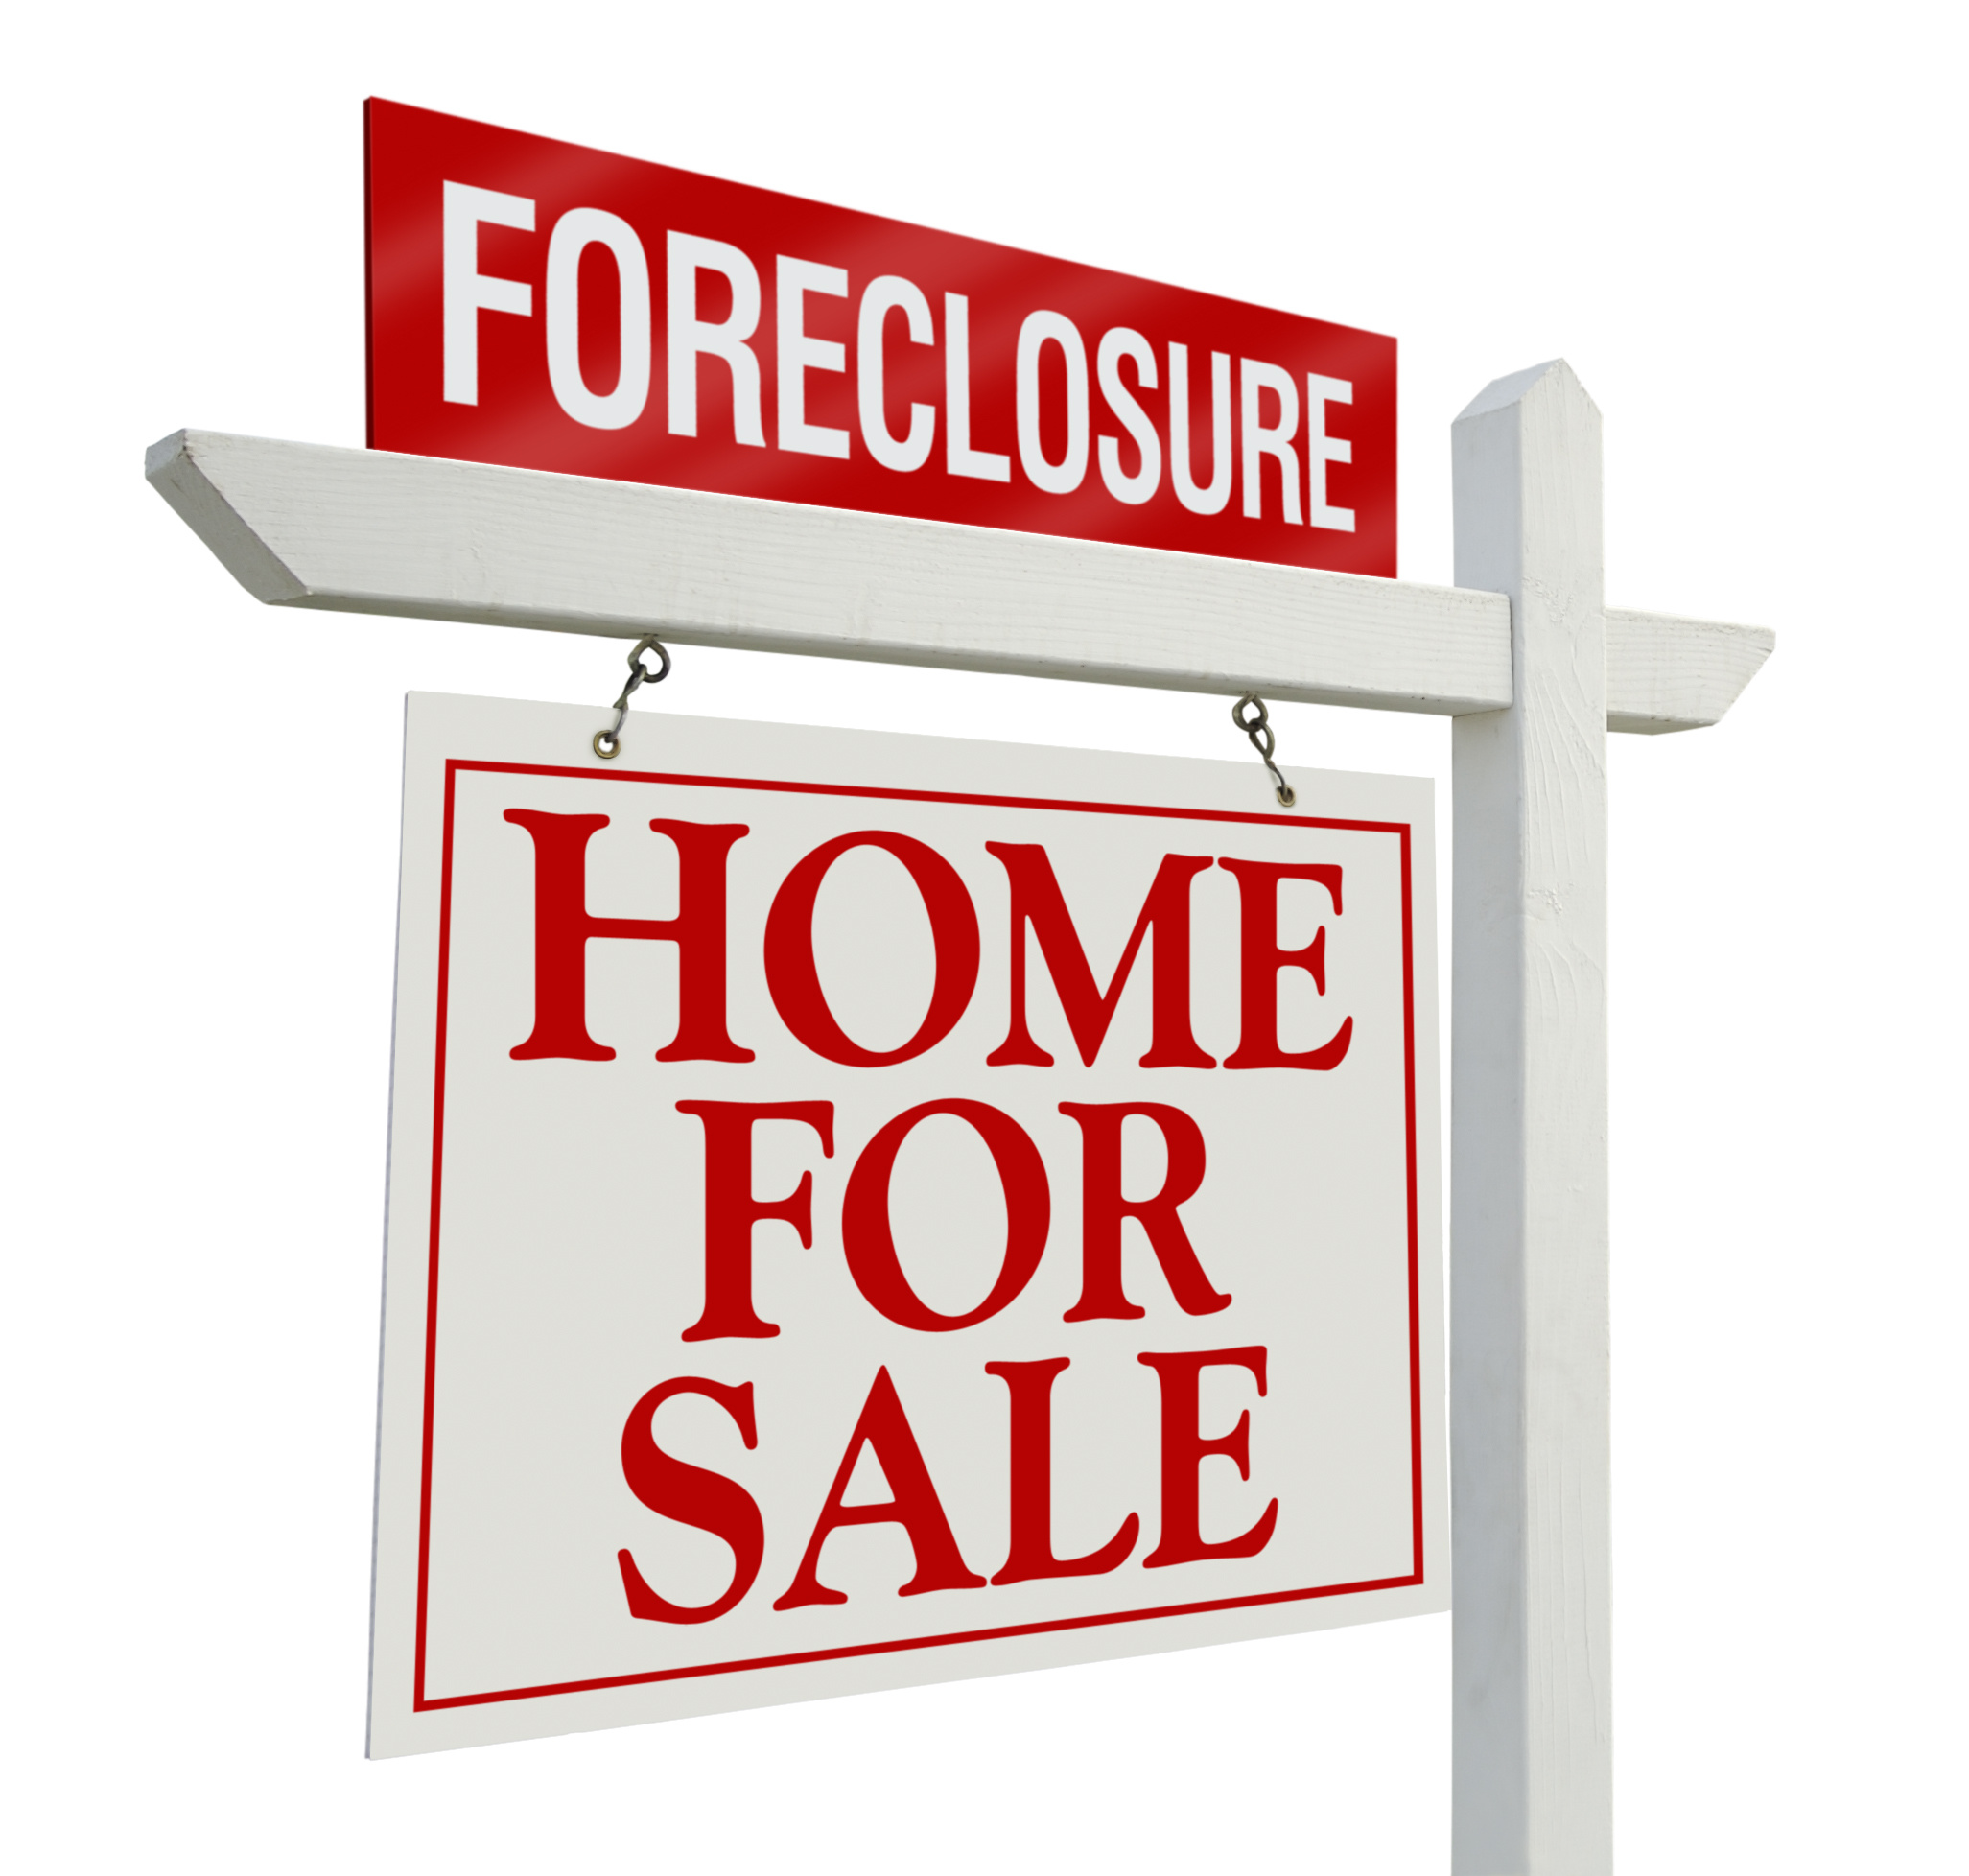 An Alternative to Foreclosure